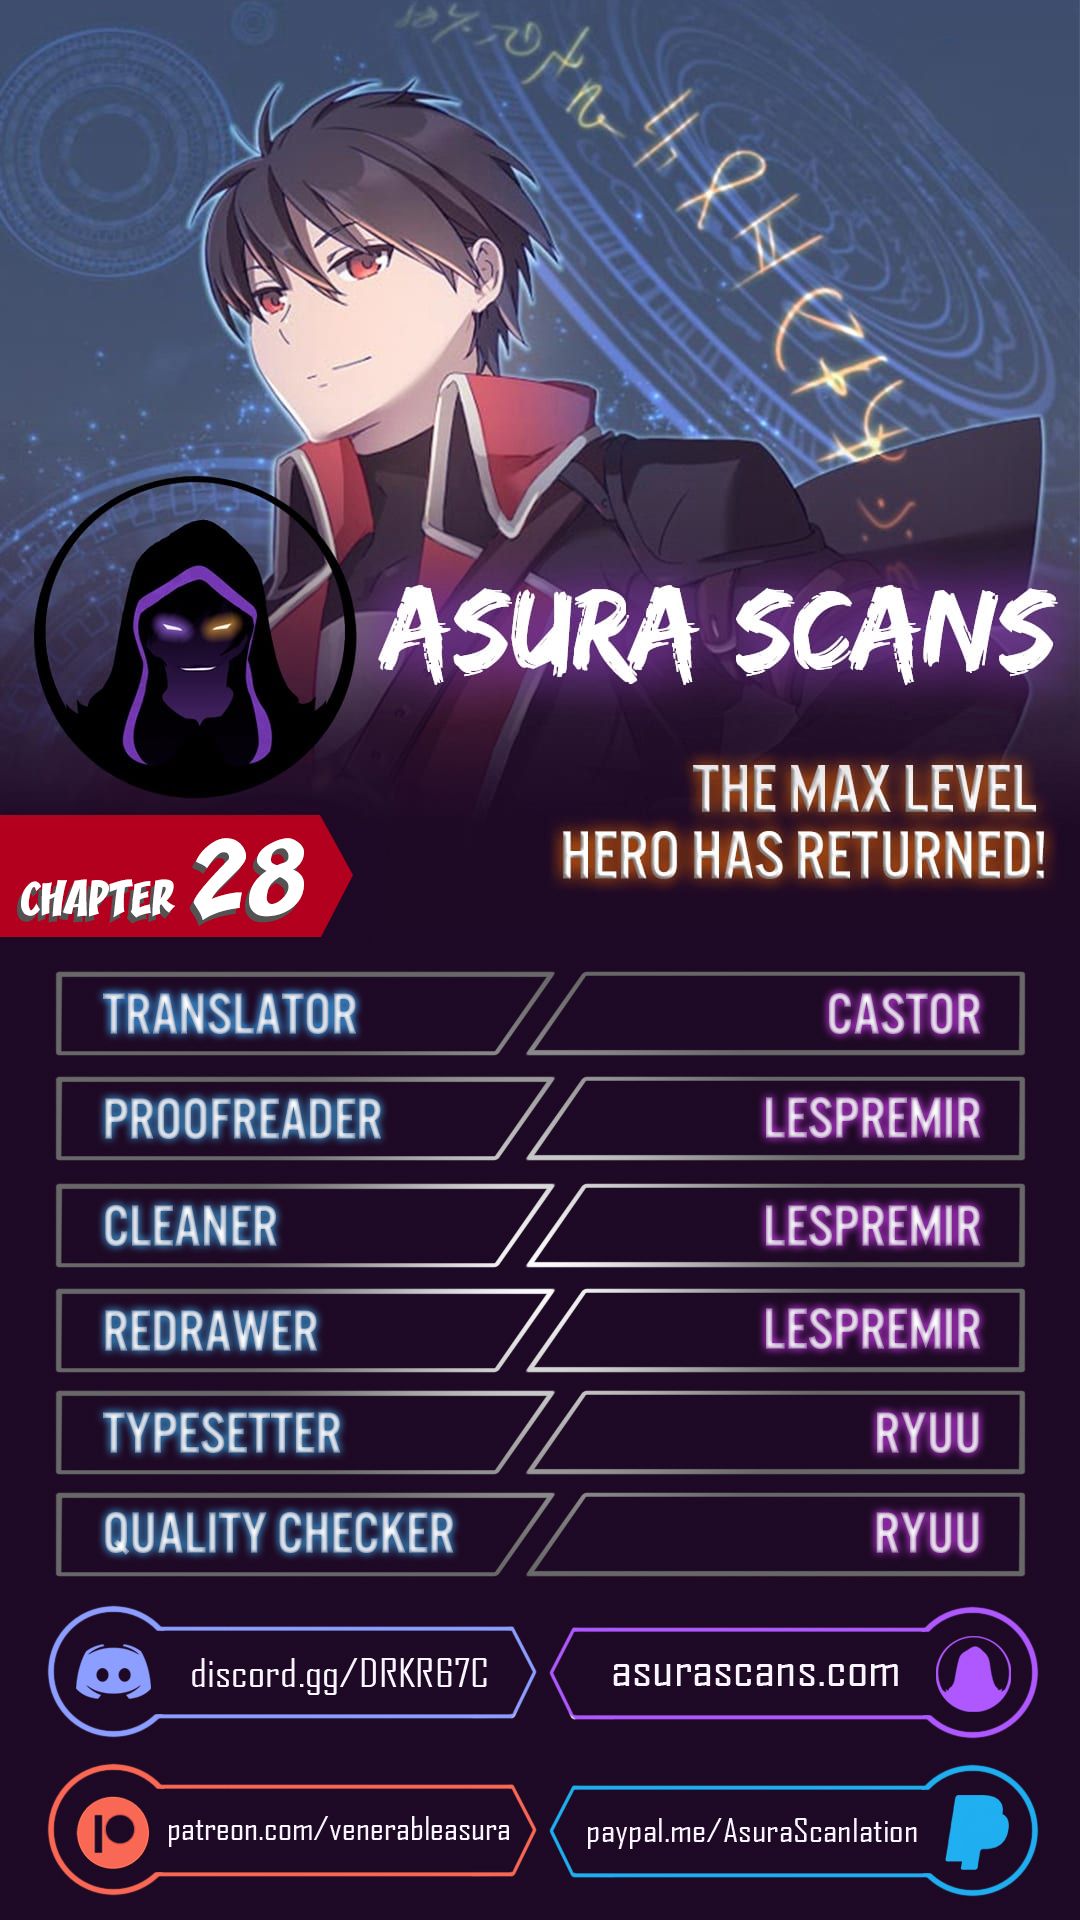 The MAX leveled hero will return! Chapter 28